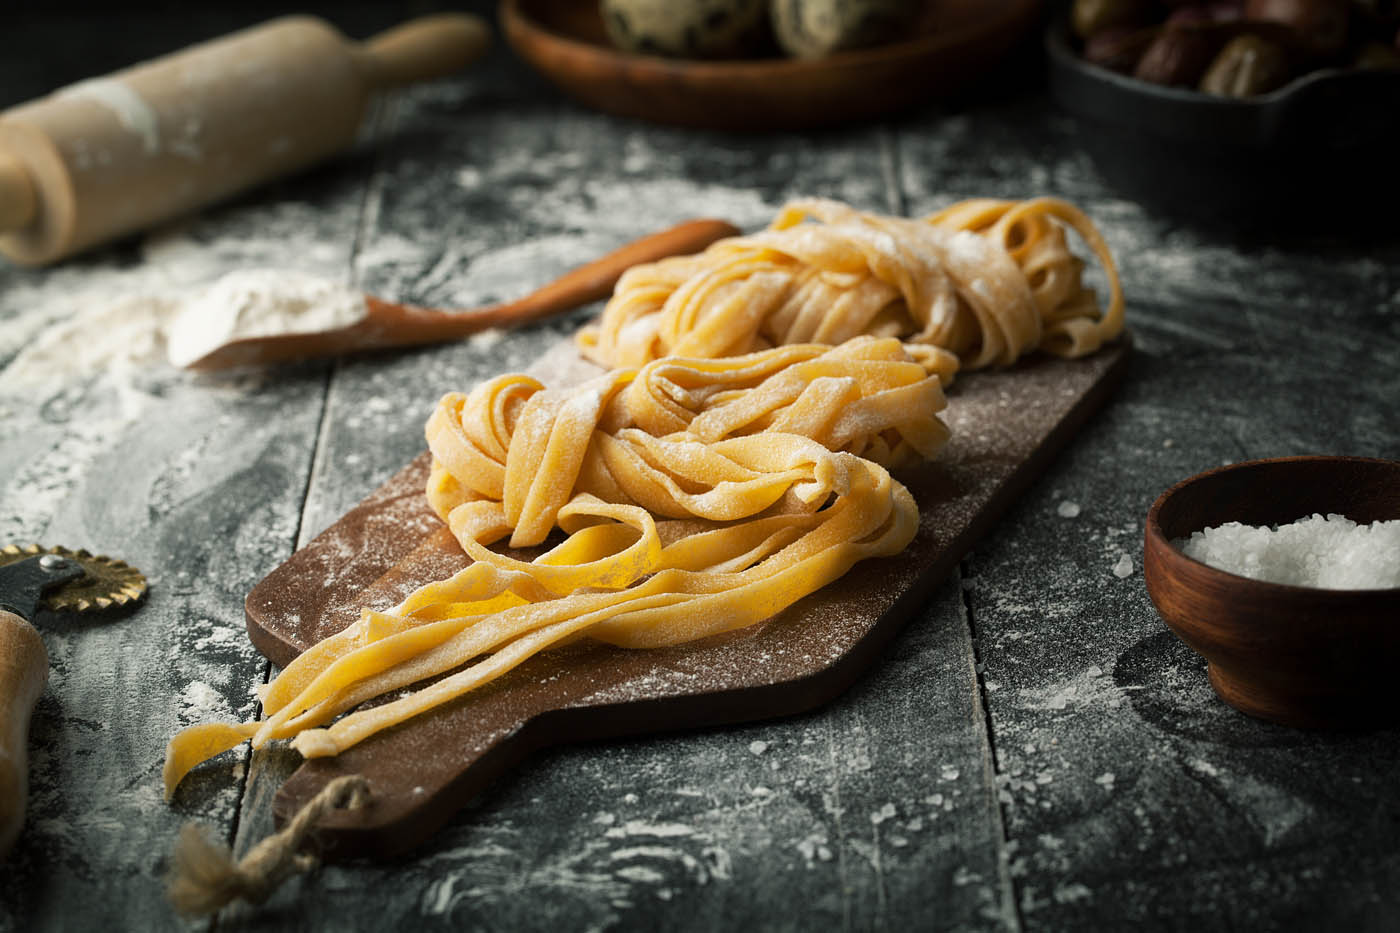 The Real Food Academy - All About Pasta Making